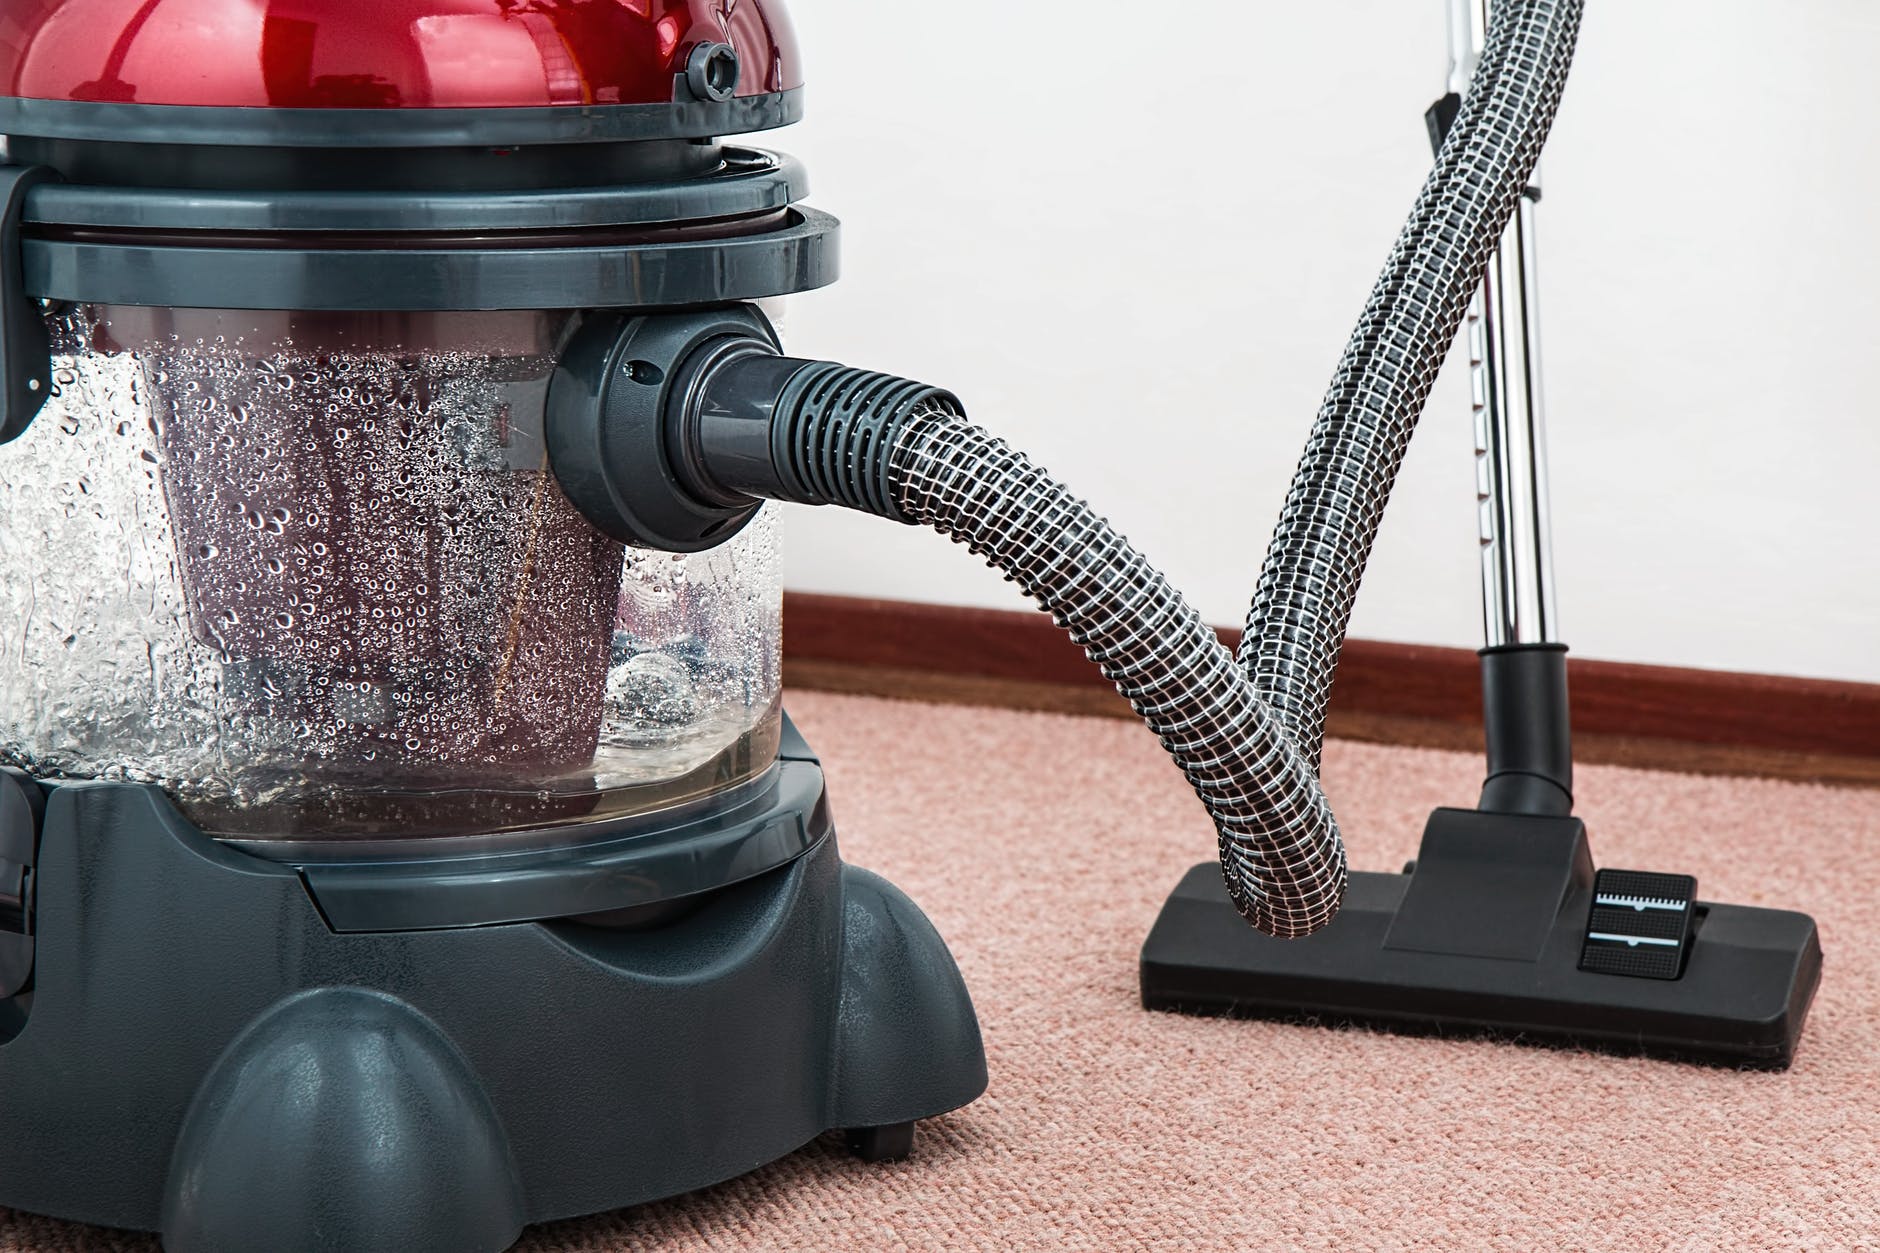 Carpet washer: how to choose the best